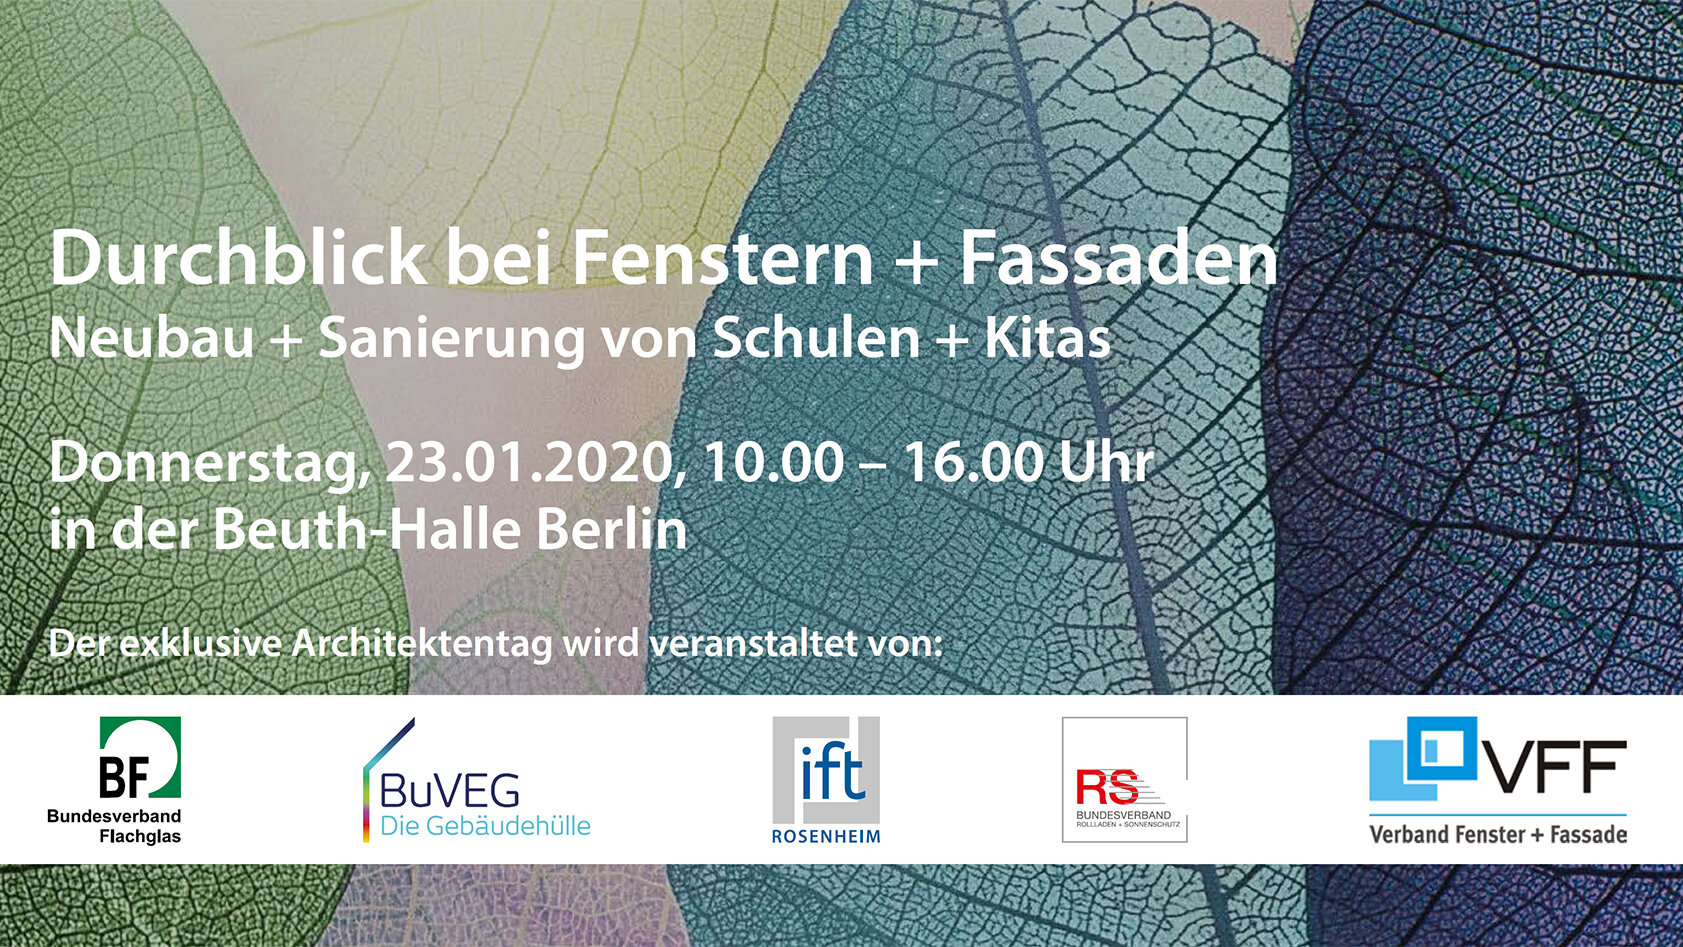 The invitation to the 1st Architects' Day of the ift Rosenheim